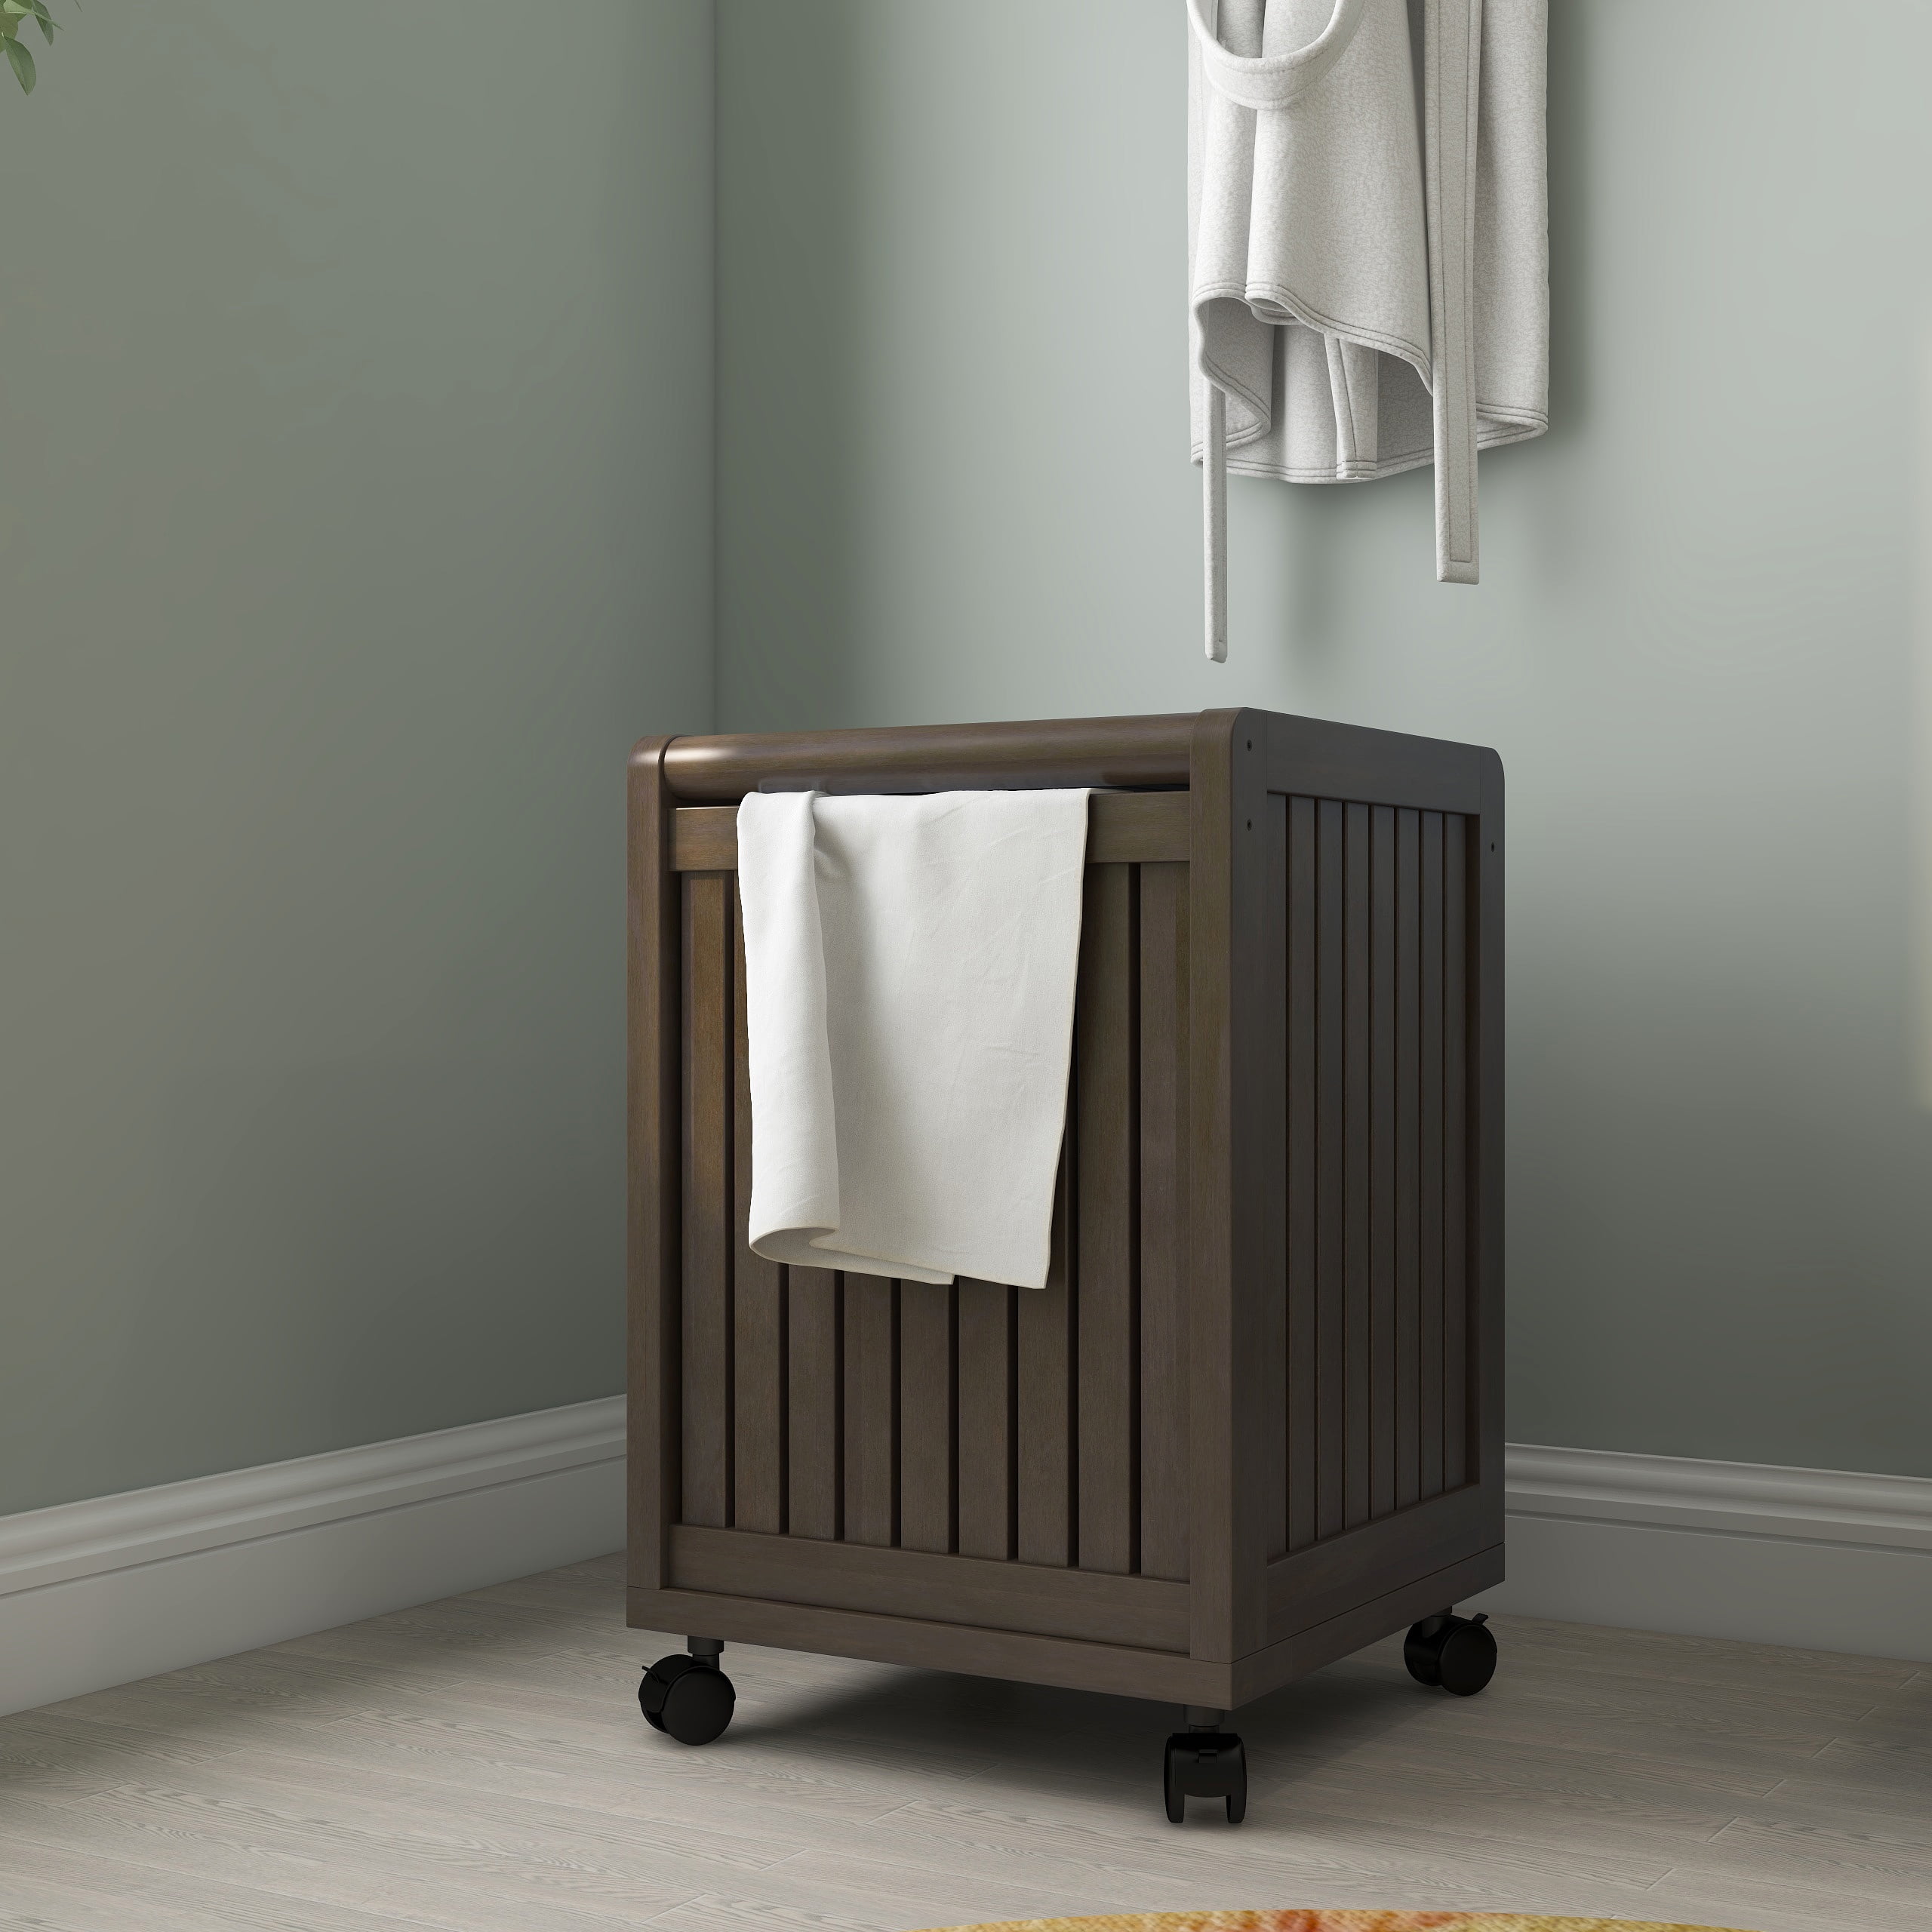 Solid Wood Mobile Laundry Hamper With, White Wooden Laundry Hamper With Lid